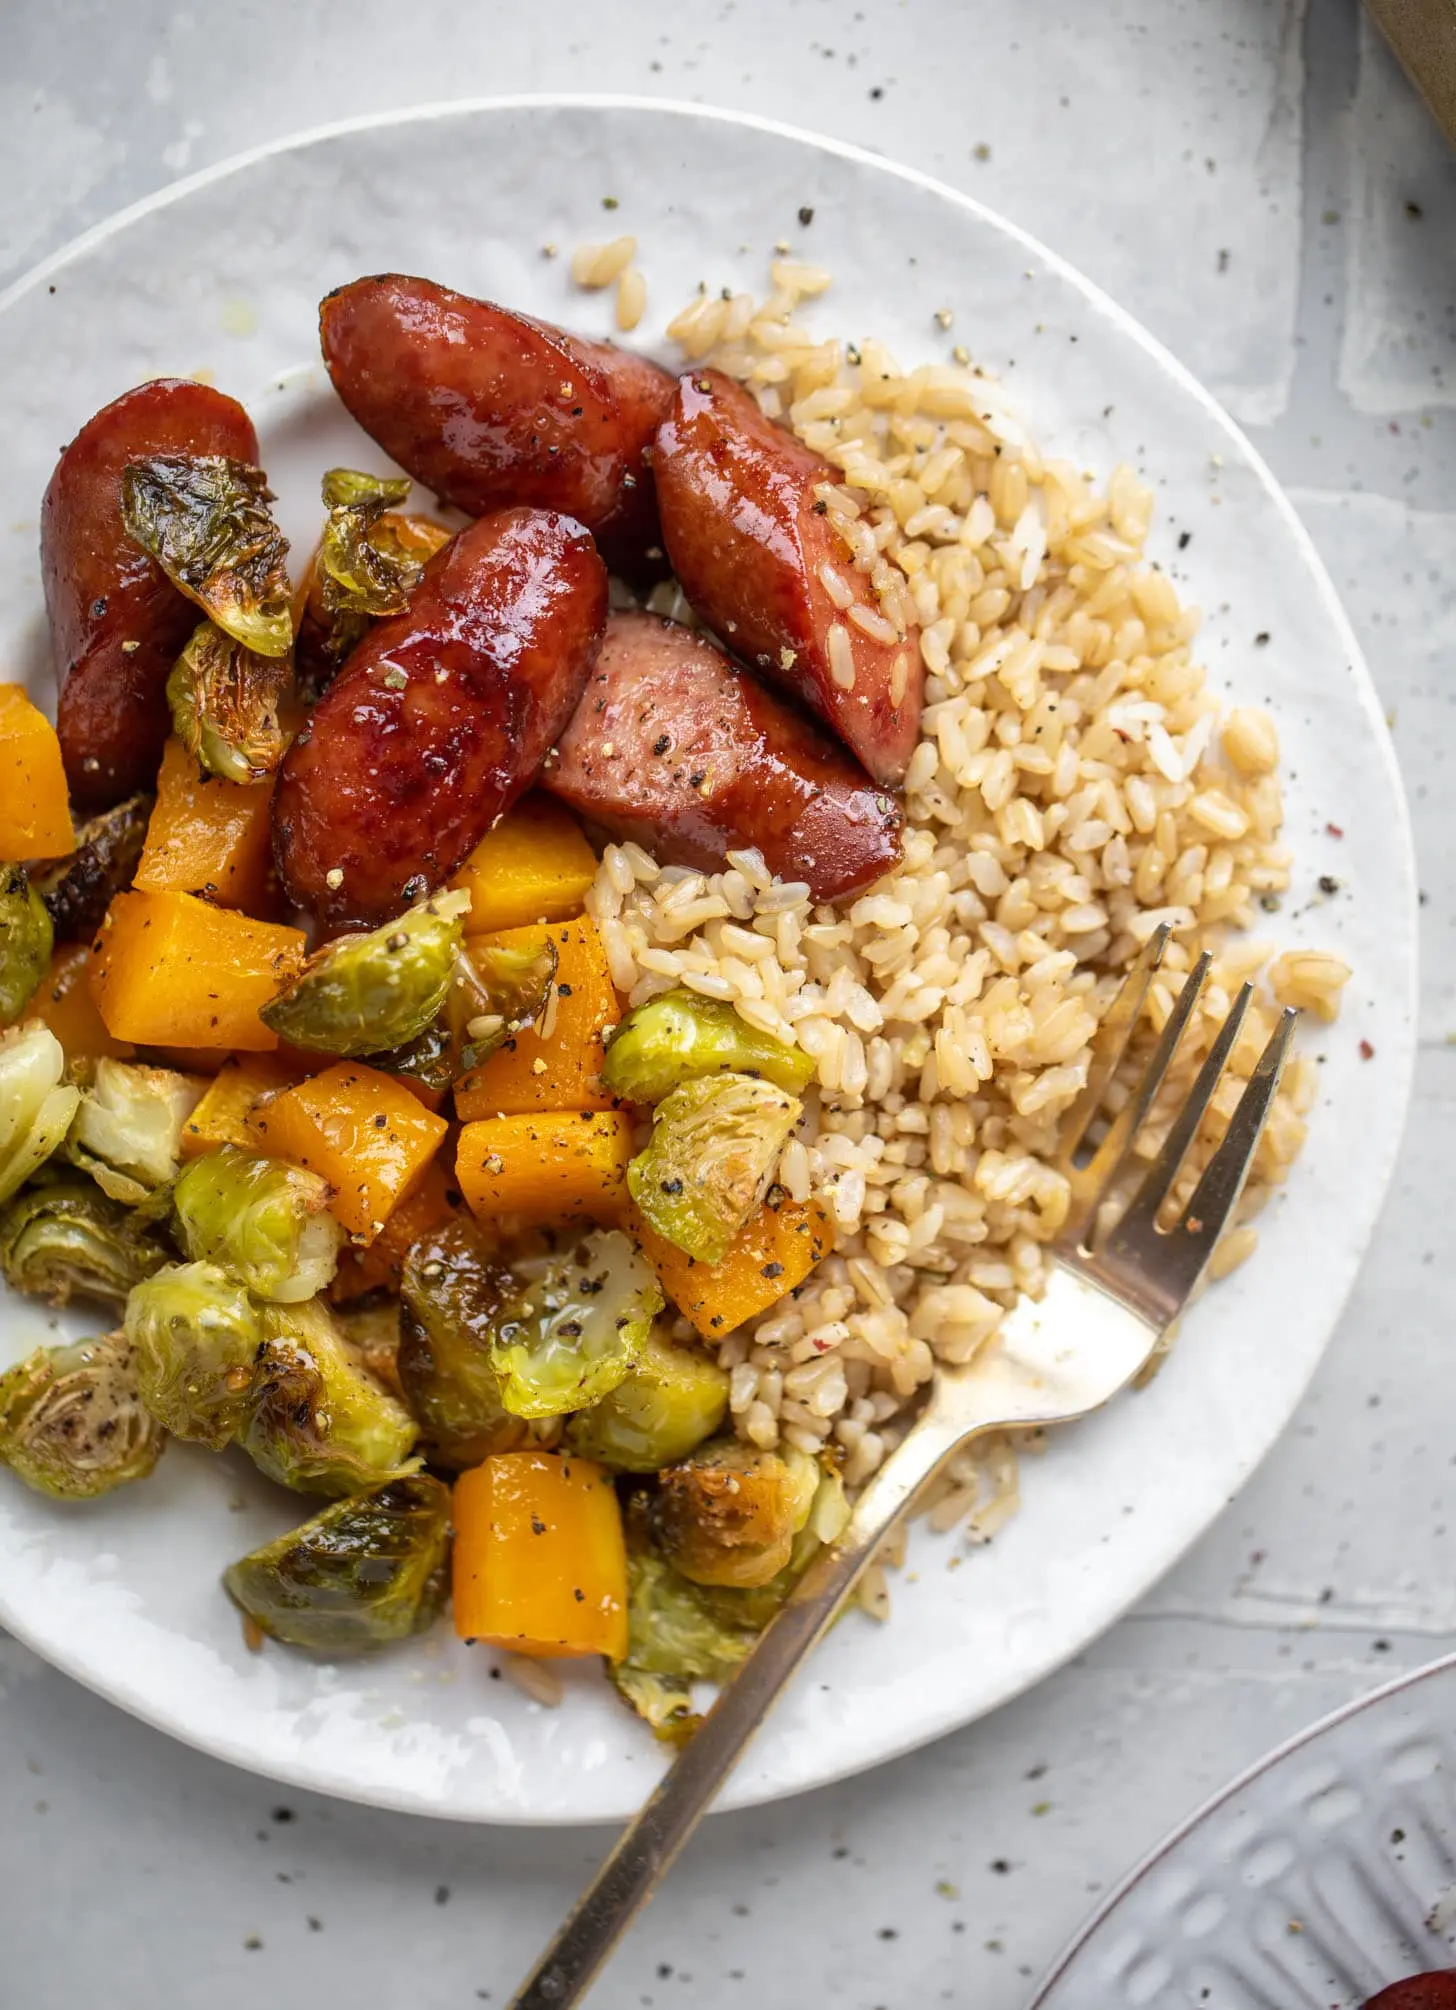 smoked sausage and butternut squash - What meat goes well with squash